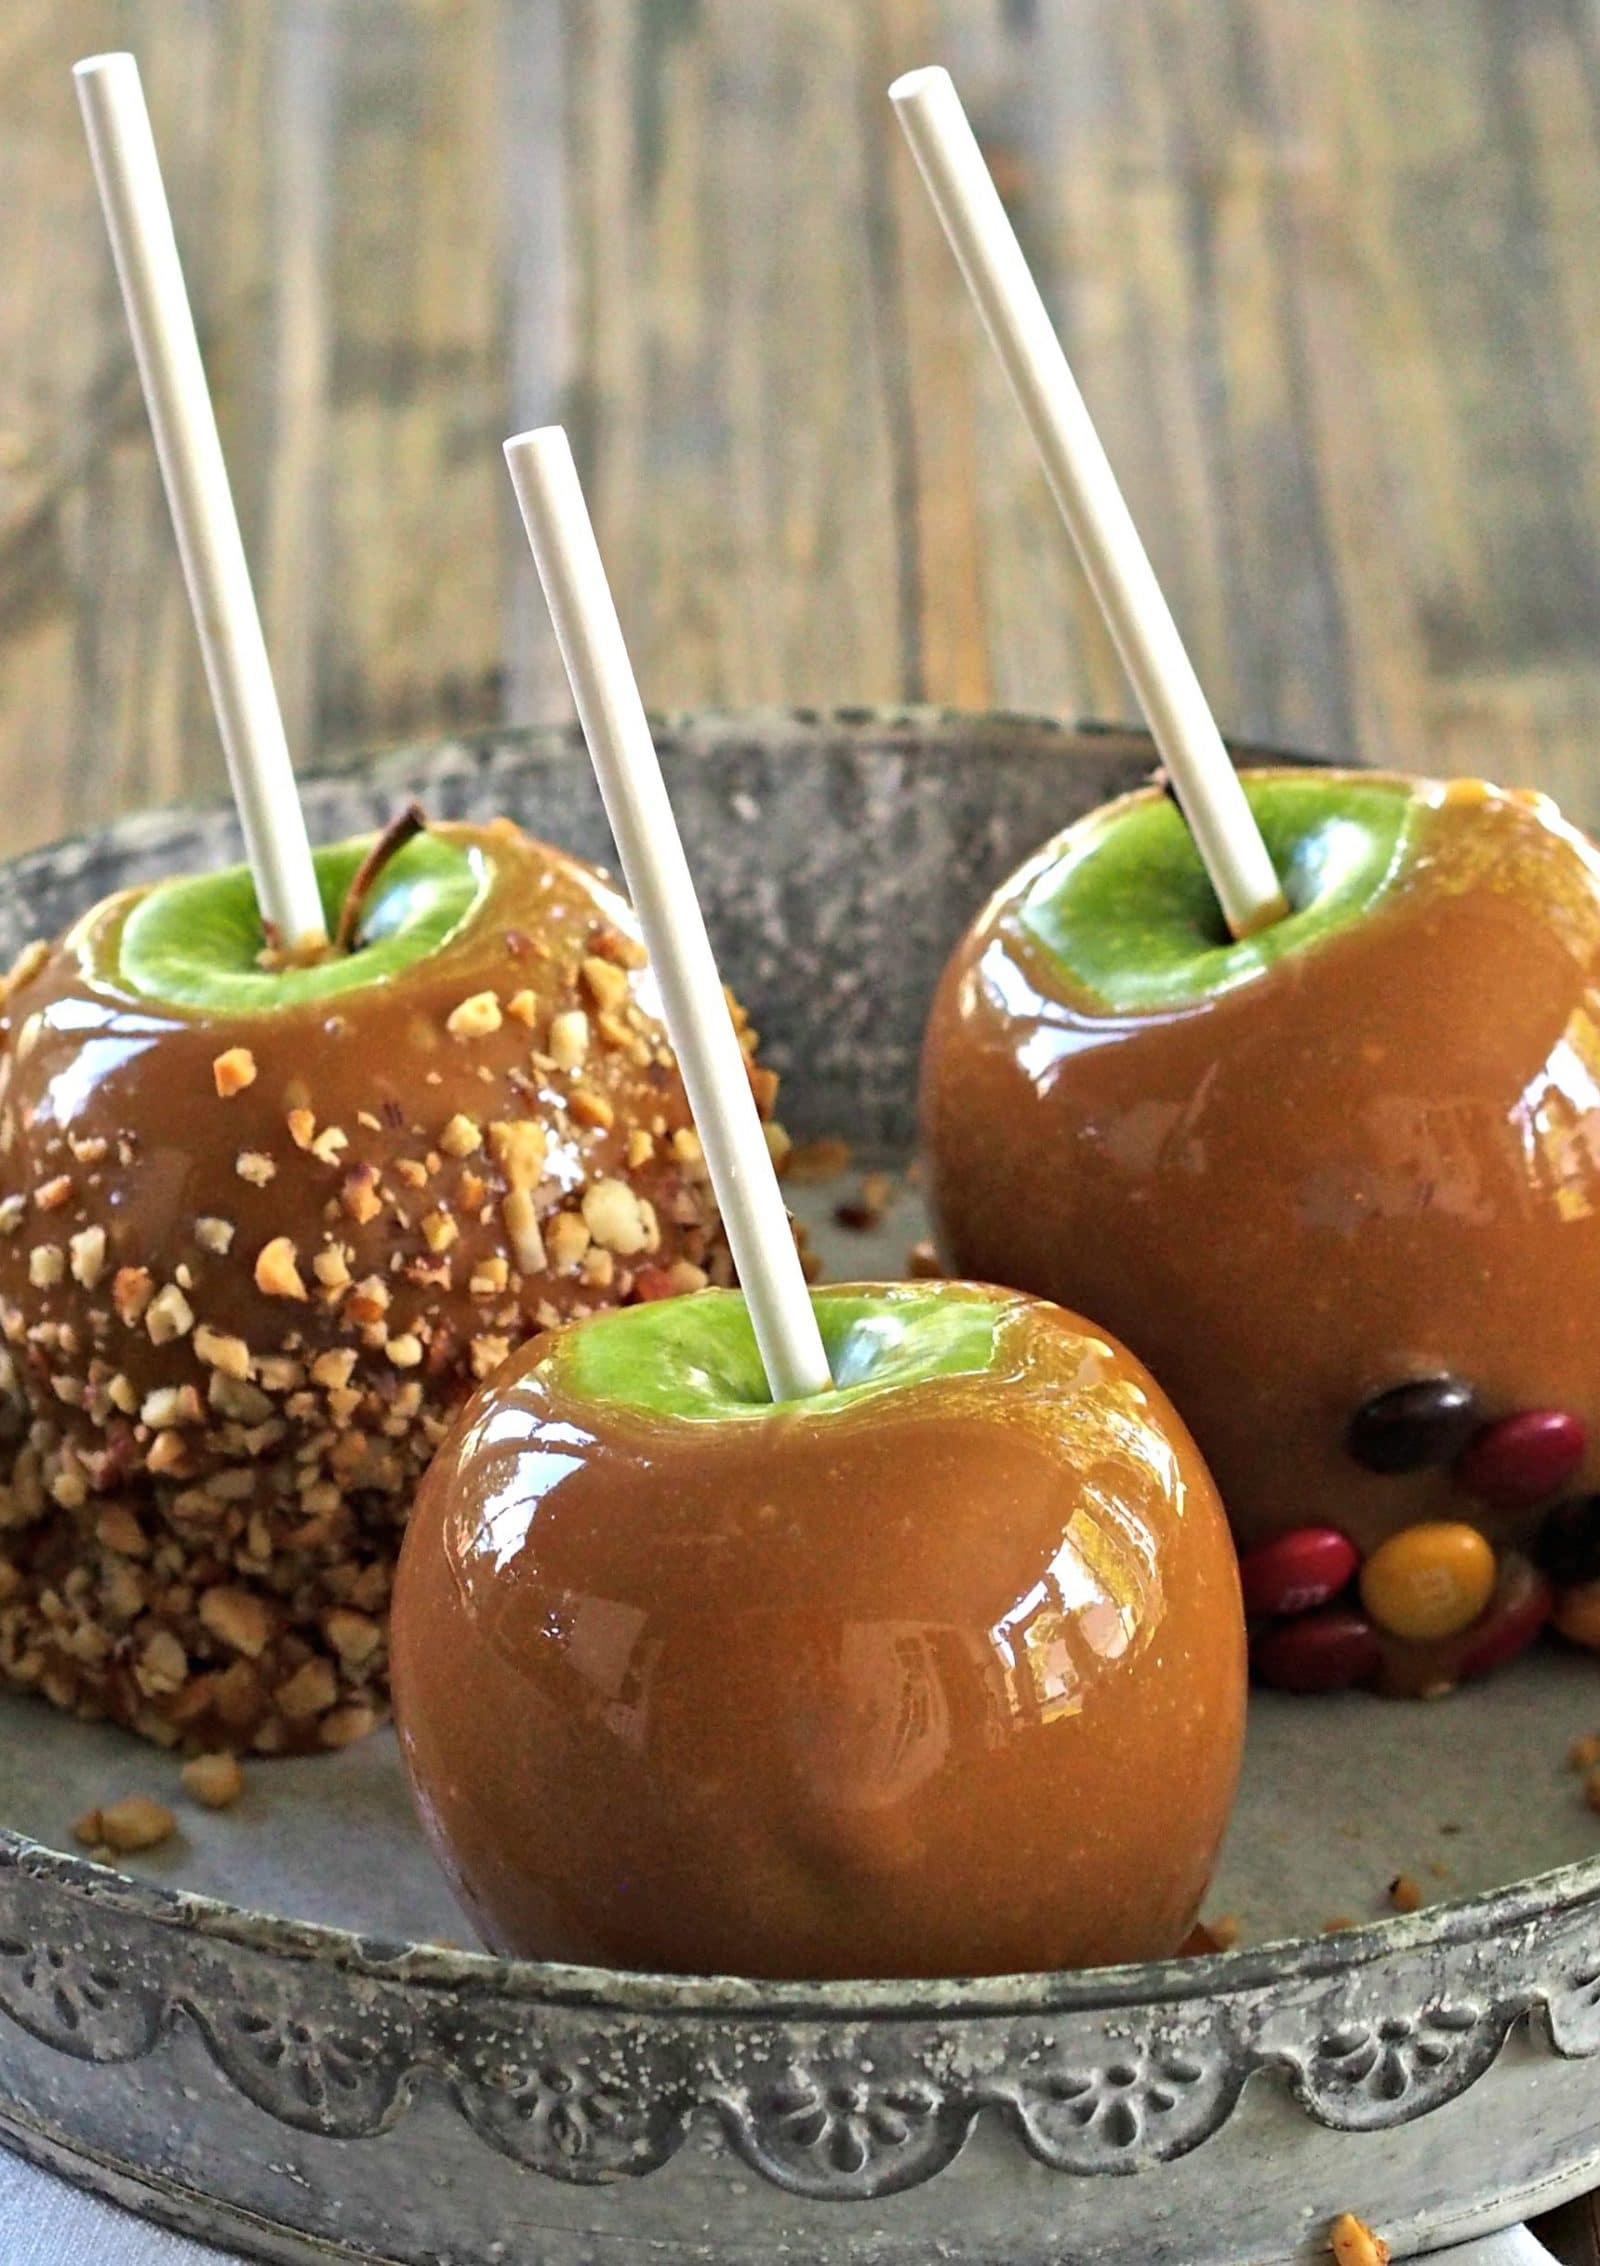 Classic Caramel Apples. Young or old - everyone's most-loved fall treat. Juicy, tart apples smothered in melted caramel then dipped in favorite toppings. Simply Sated